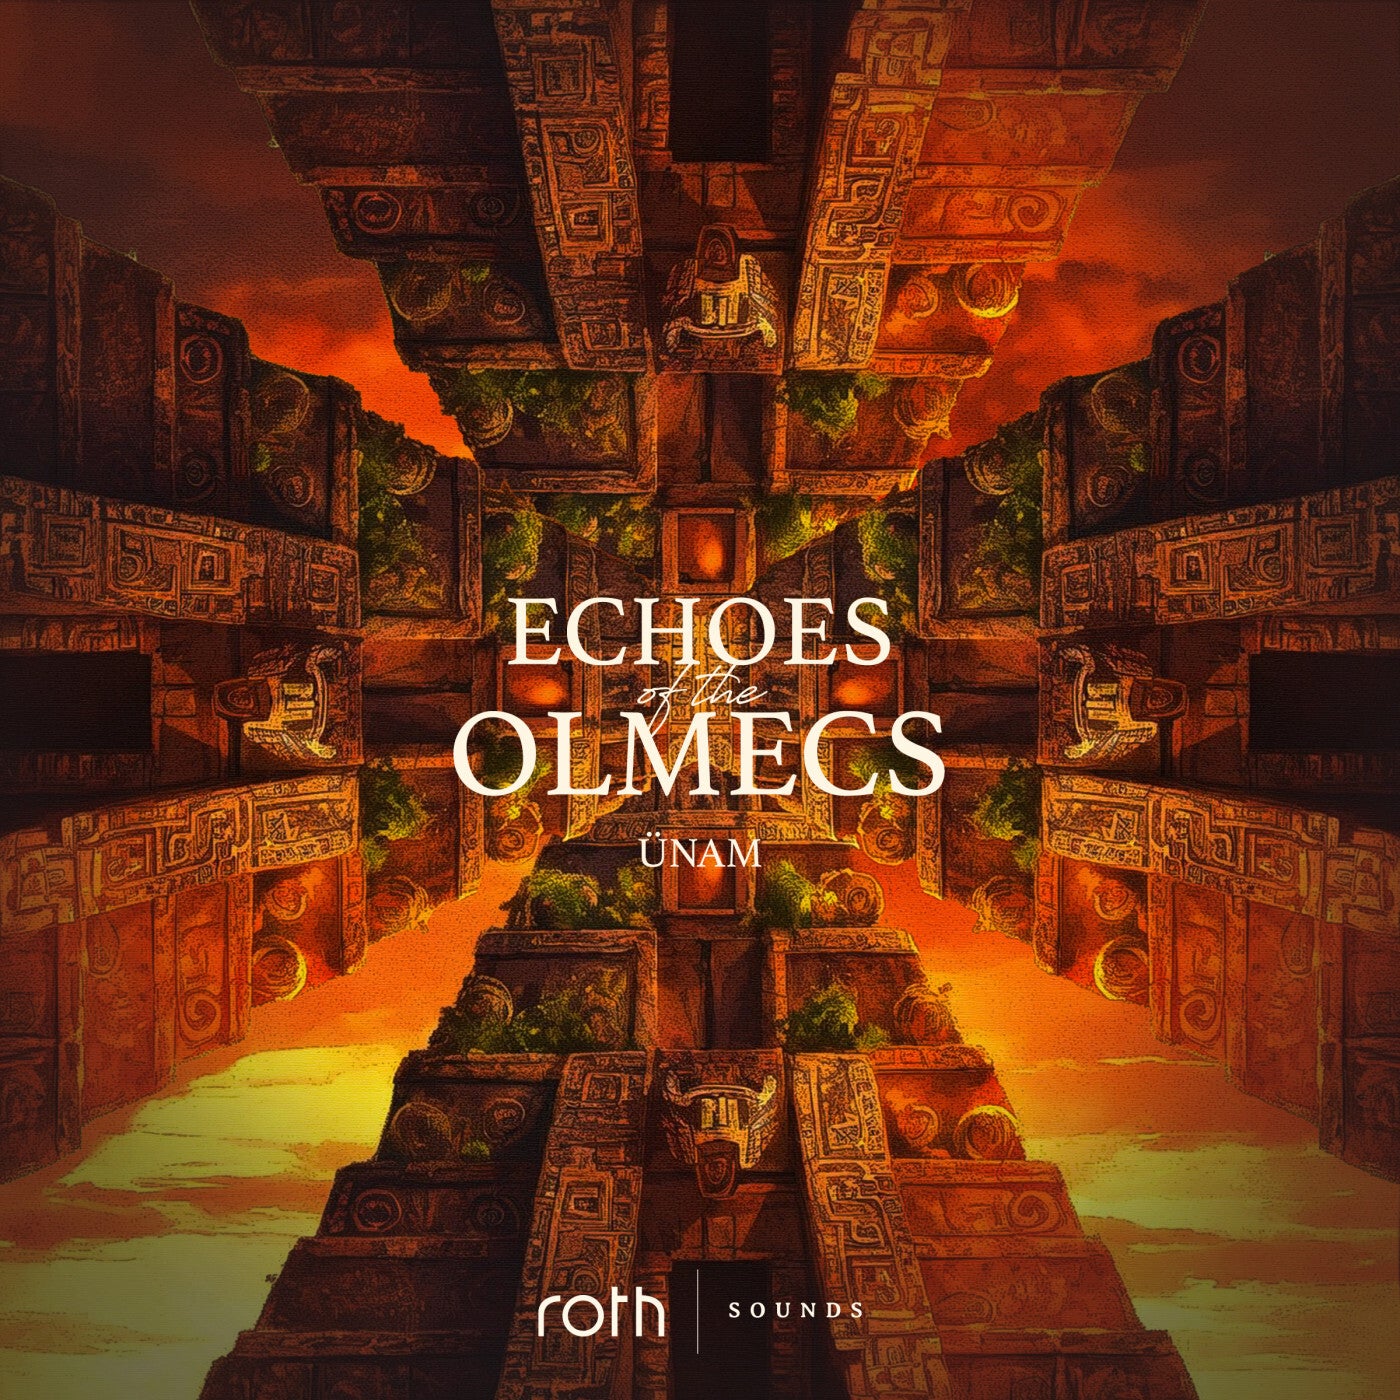 Echoes of the Olmecs